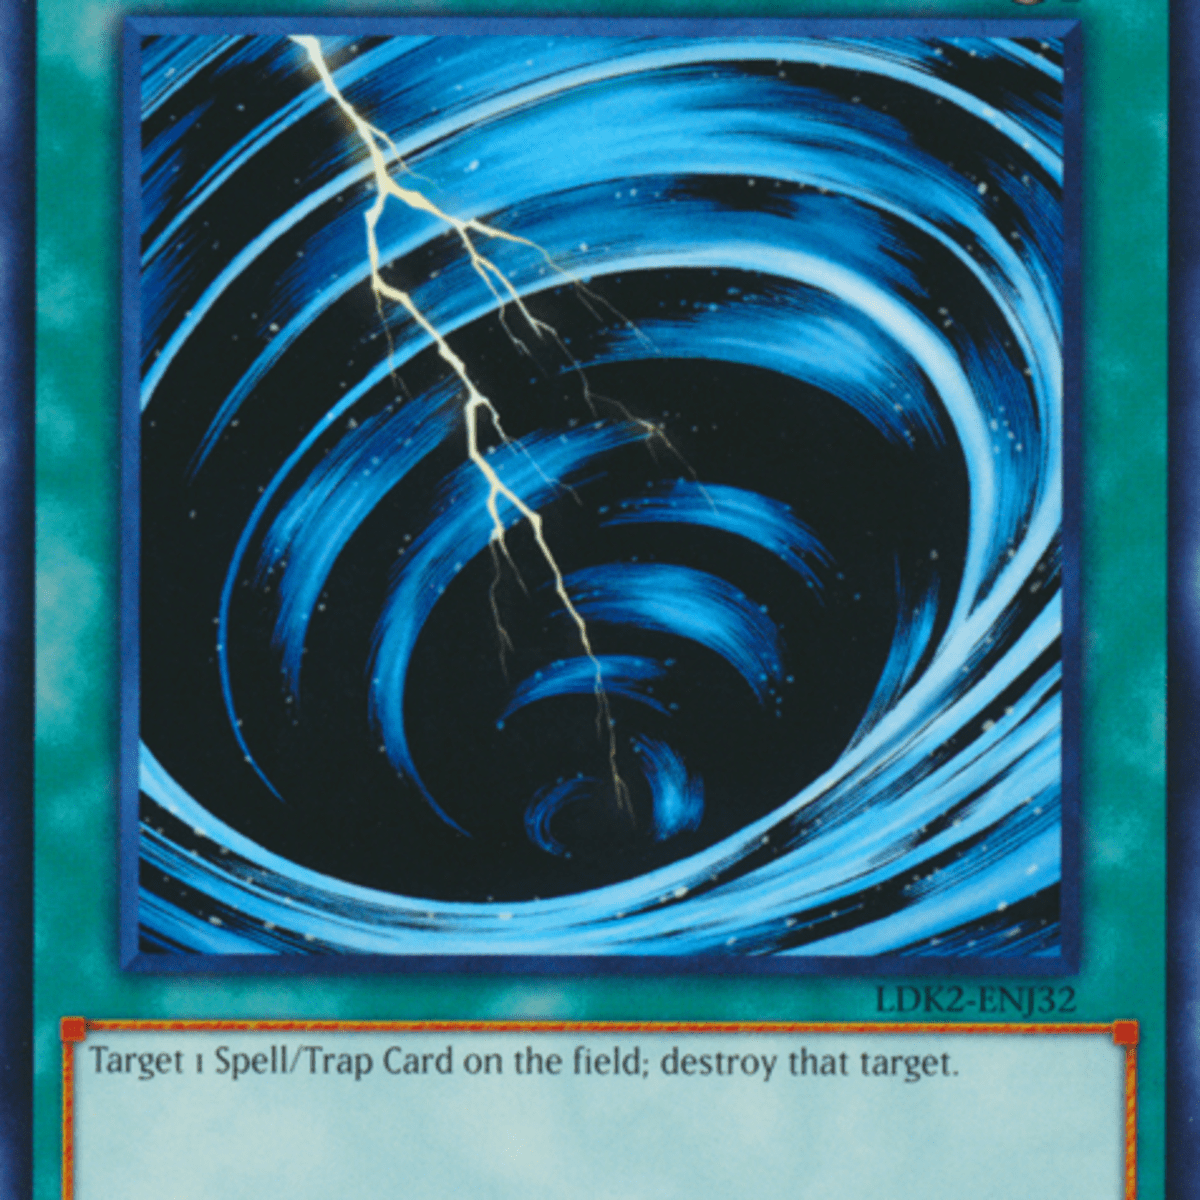 use a spell card five times in a duel